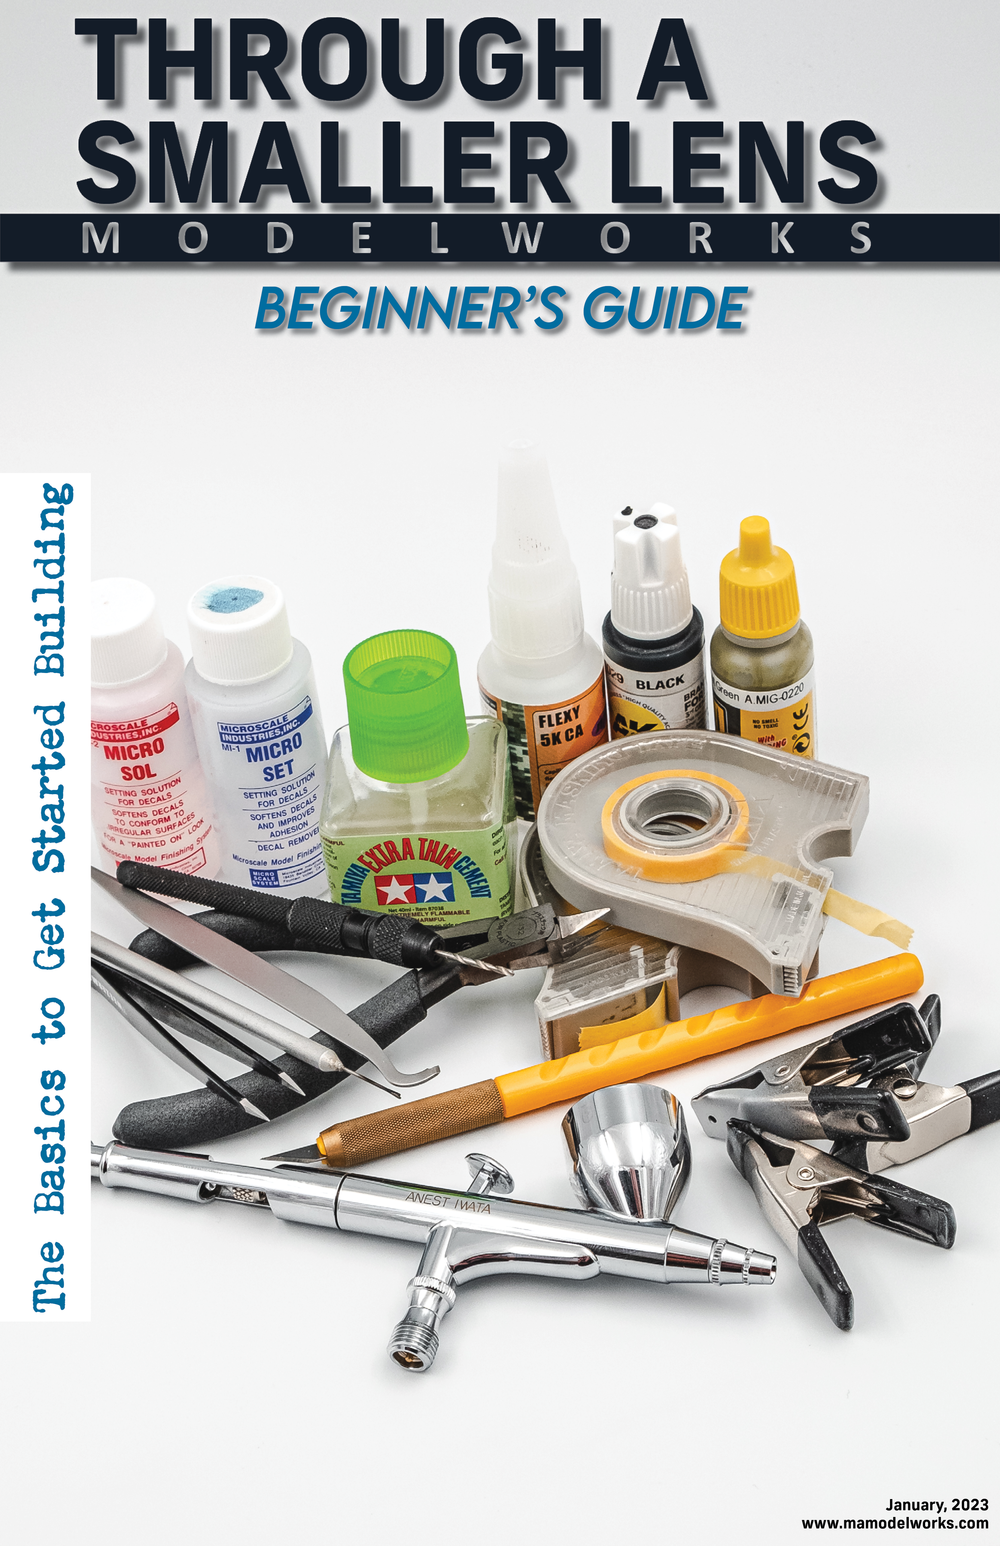 Model Building Guides Beginners Guide to Model Building